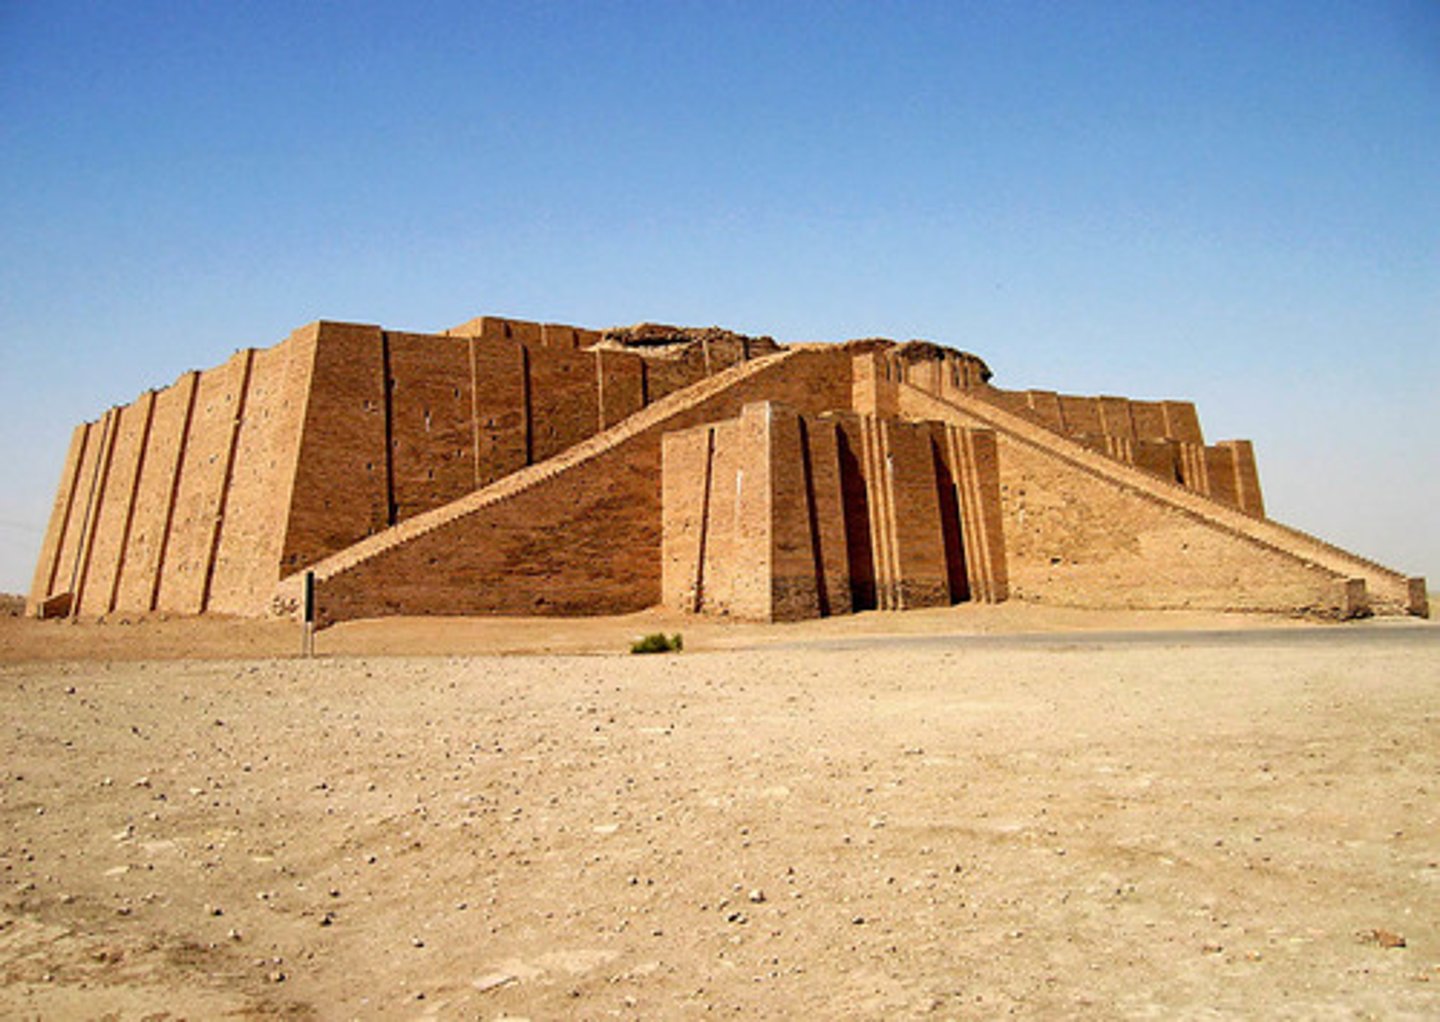 <p>a temple or tomb of the ancient Assyrians, Sumerians, or Babylonians, having the form of a terraced pyramid of successively receding stories</p>